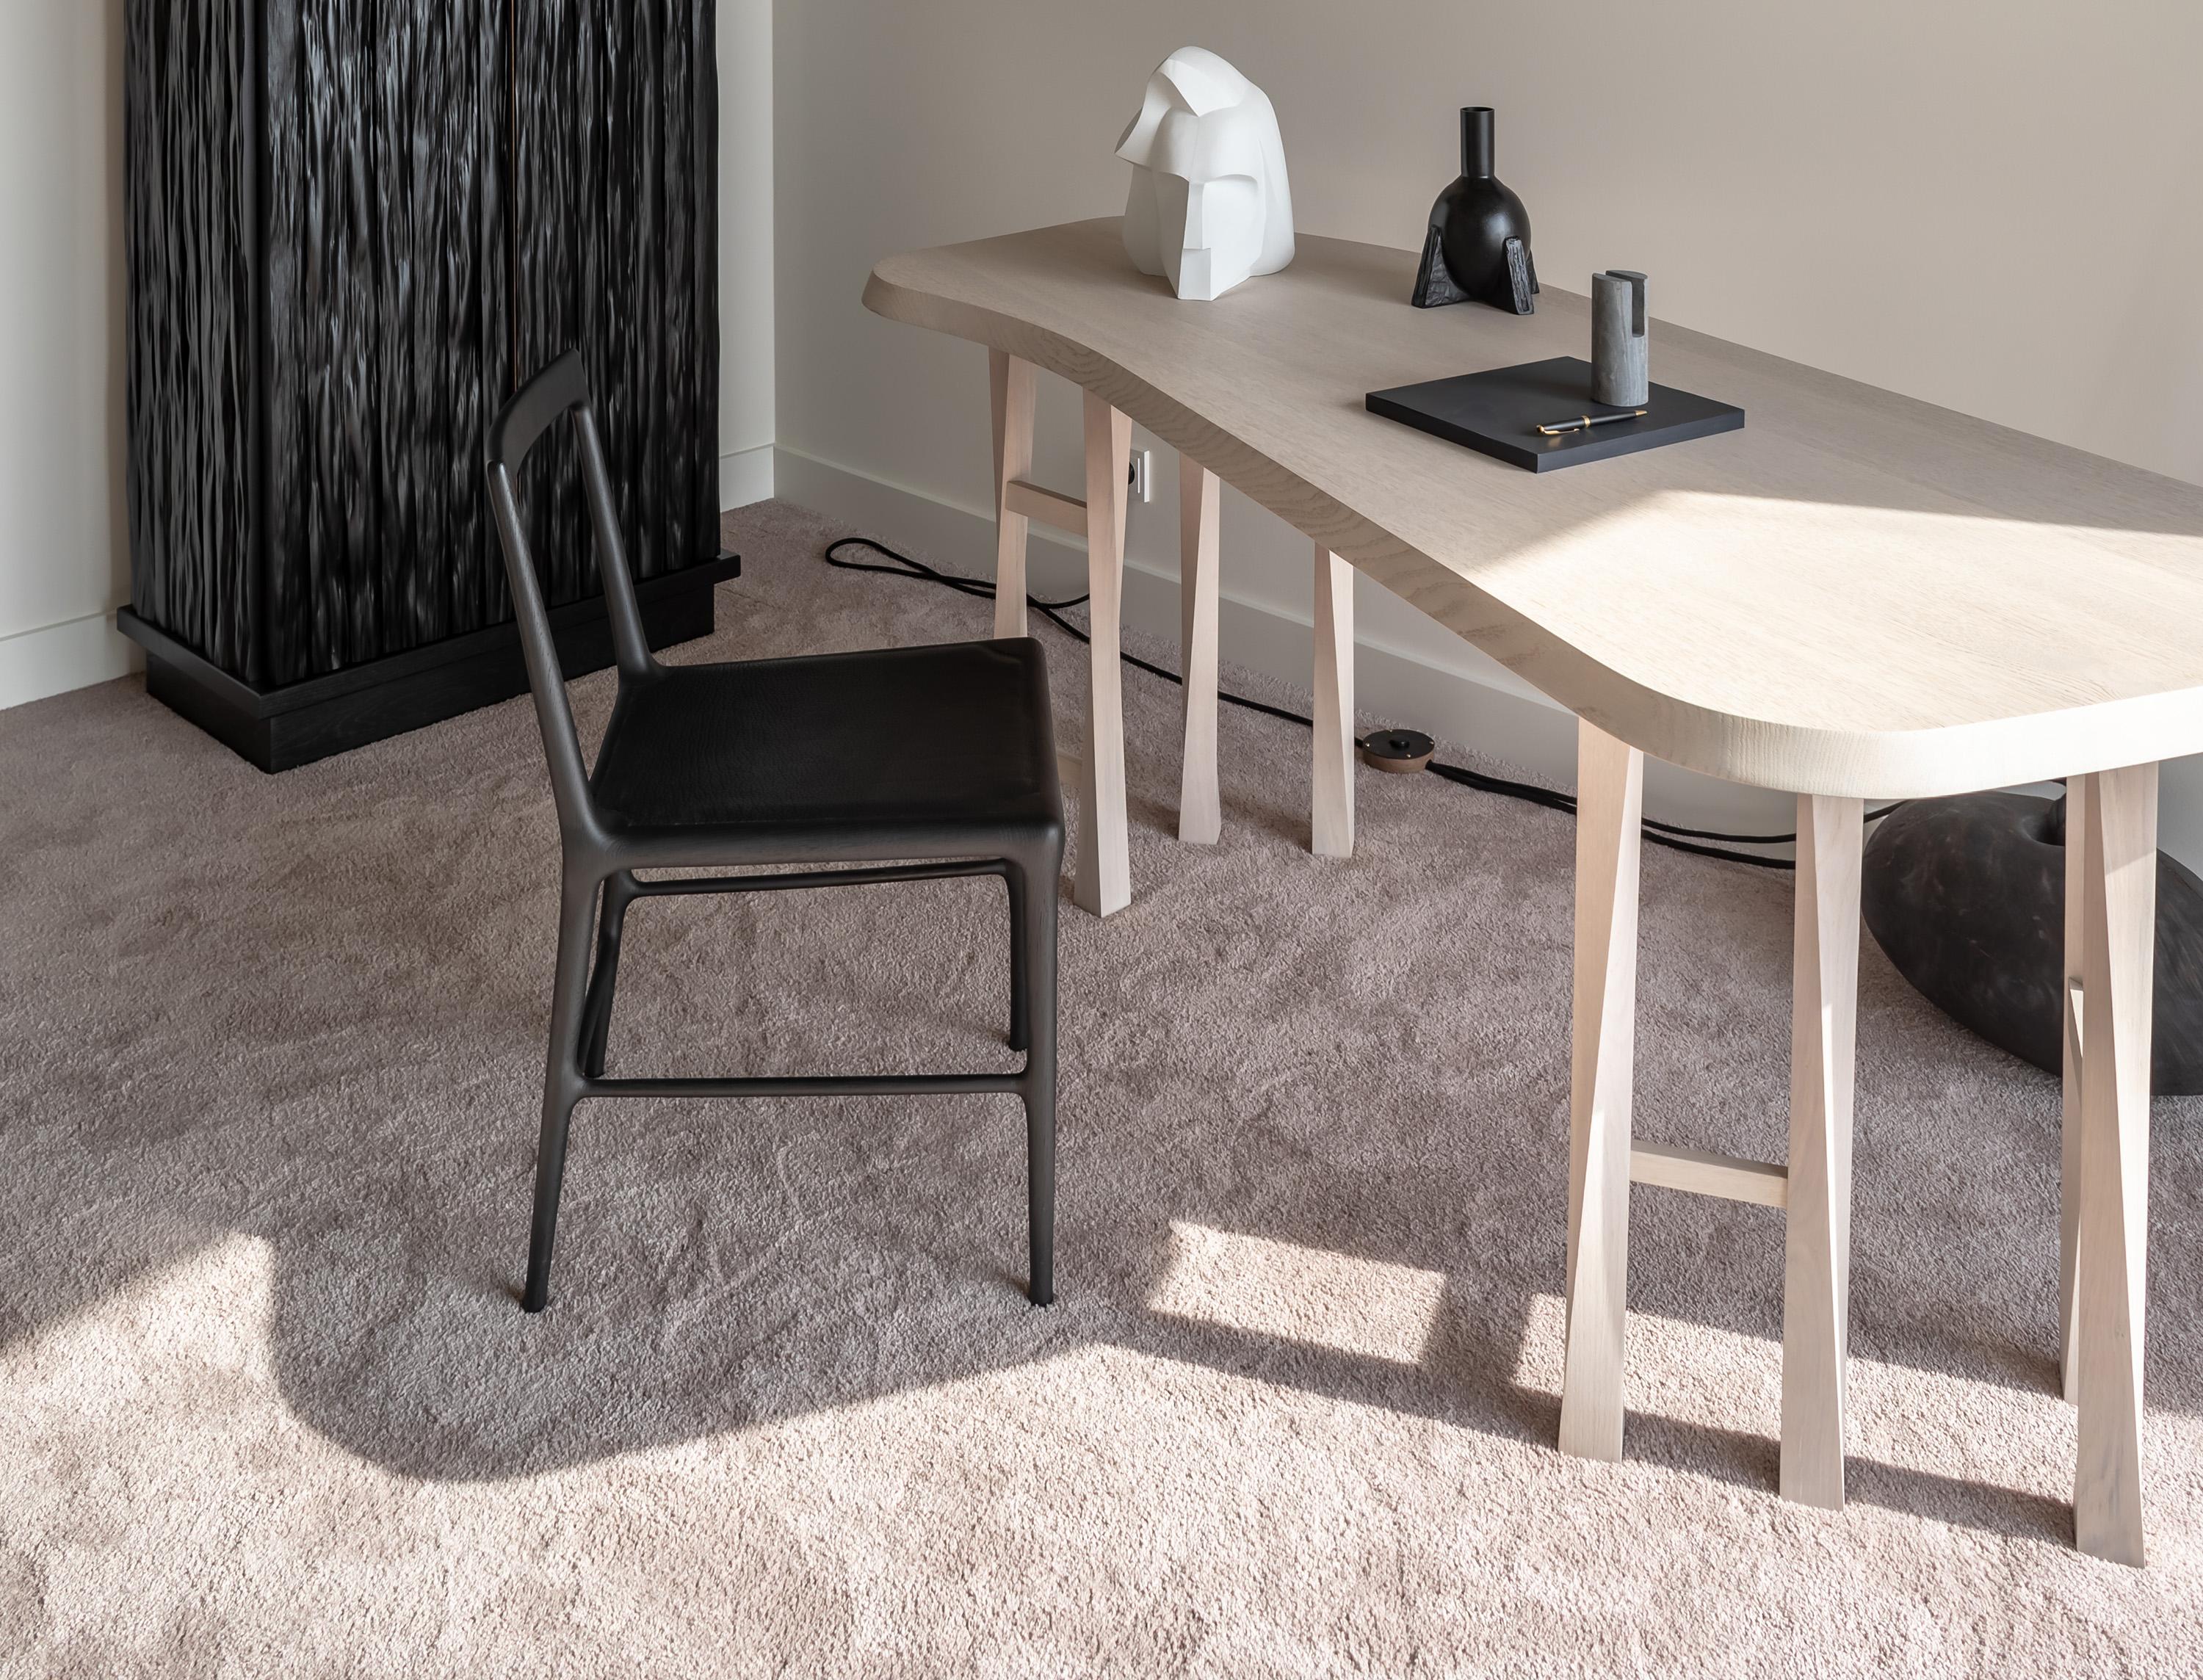 Brushed Contemporary Wooden Desk - TWI by Christophe Delcourt